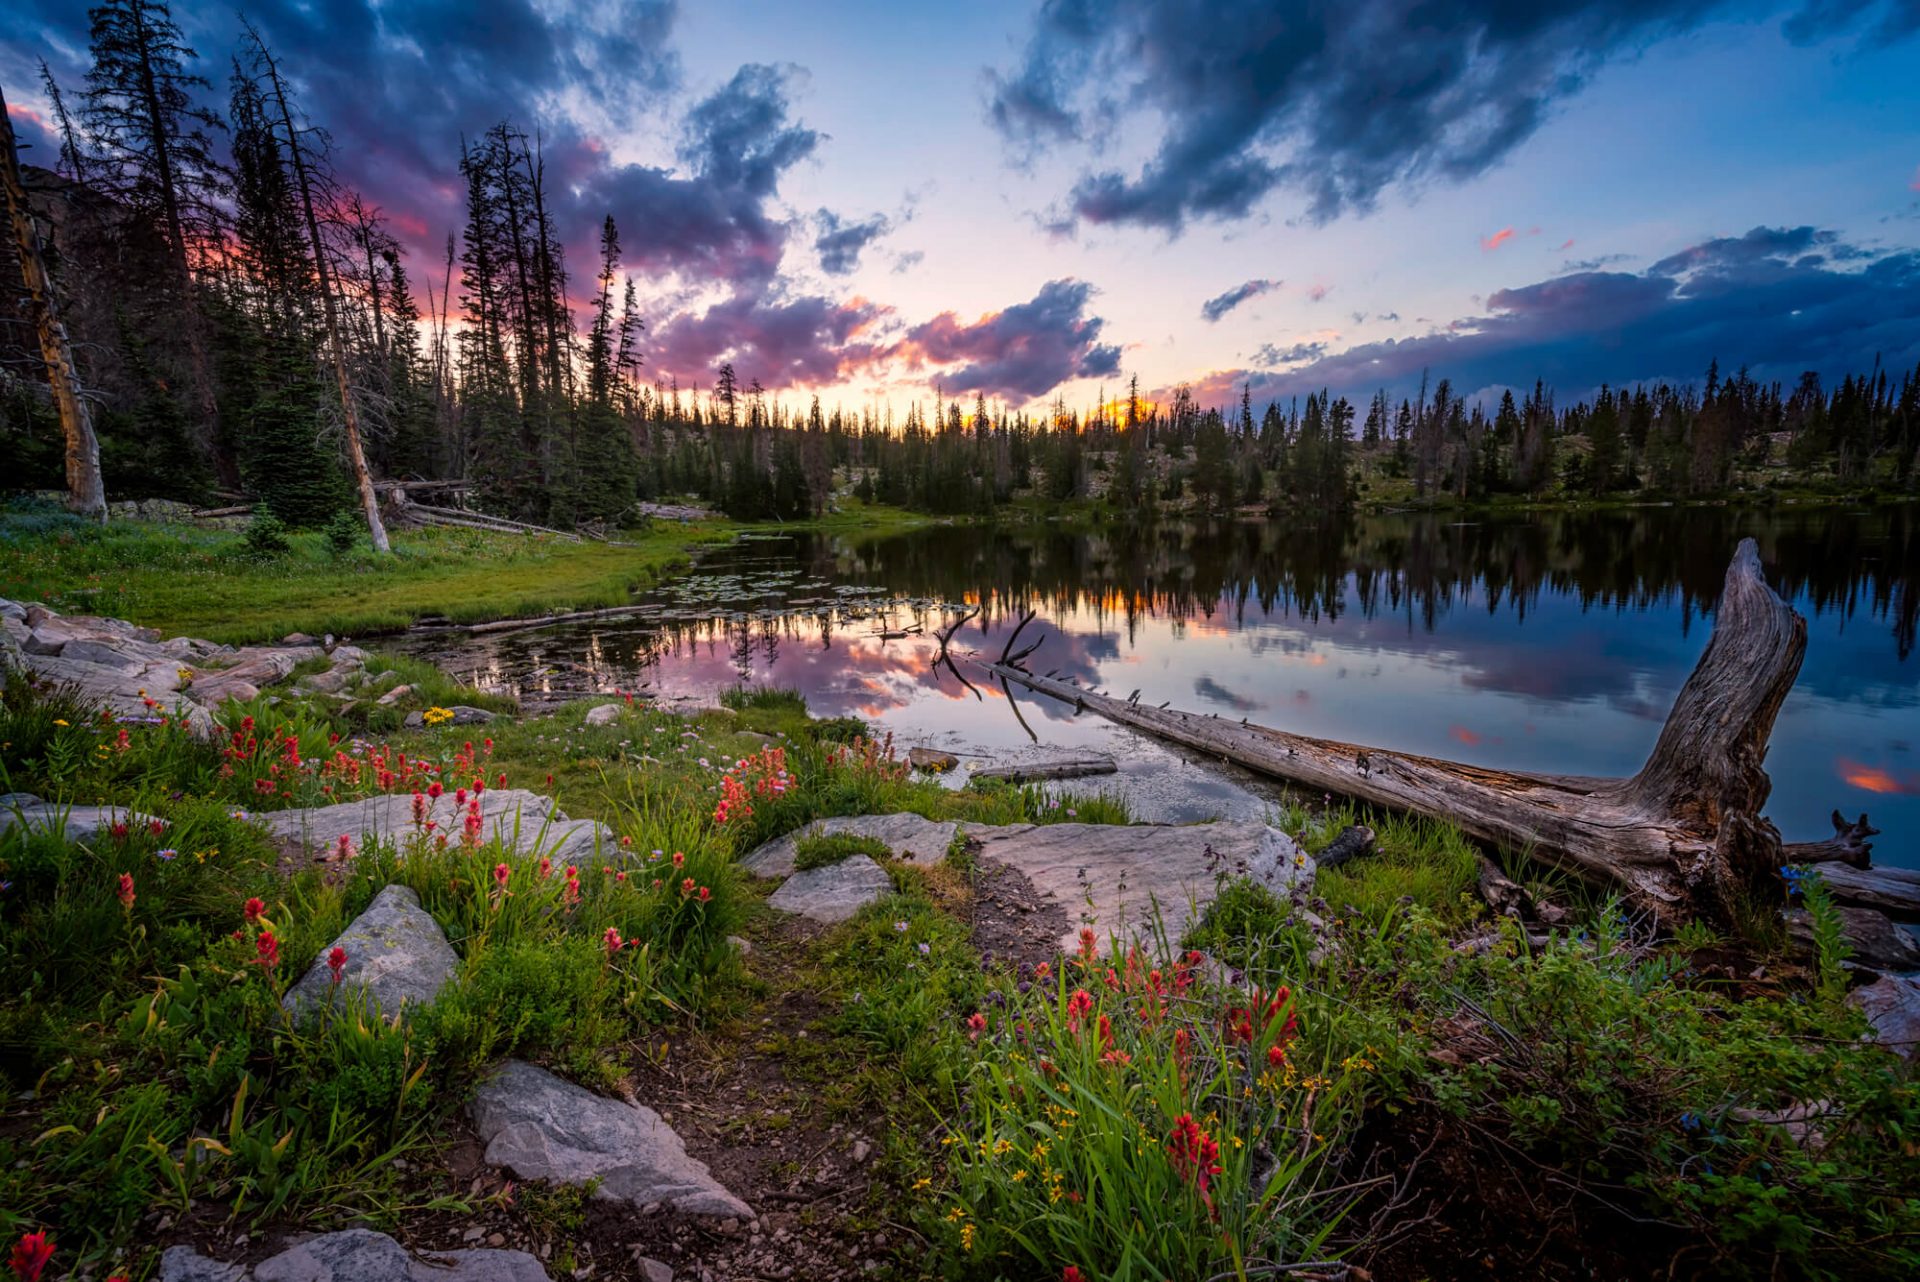 Landscape Photography From The Wasatch, Utah Landscape Photography